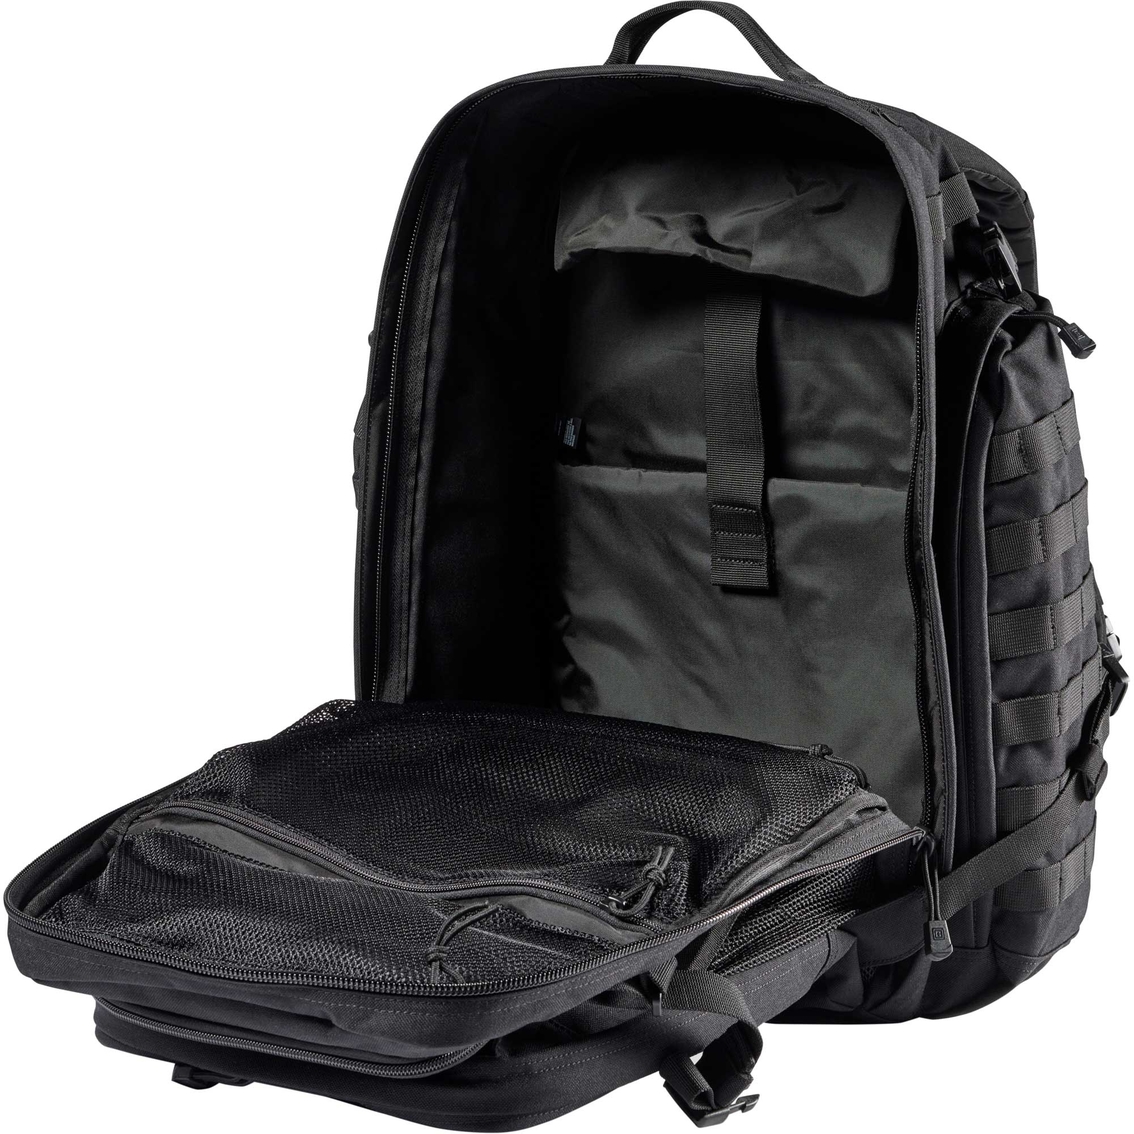 5.11 RUSH 72 2.0 Backpack - Image 9 of 10